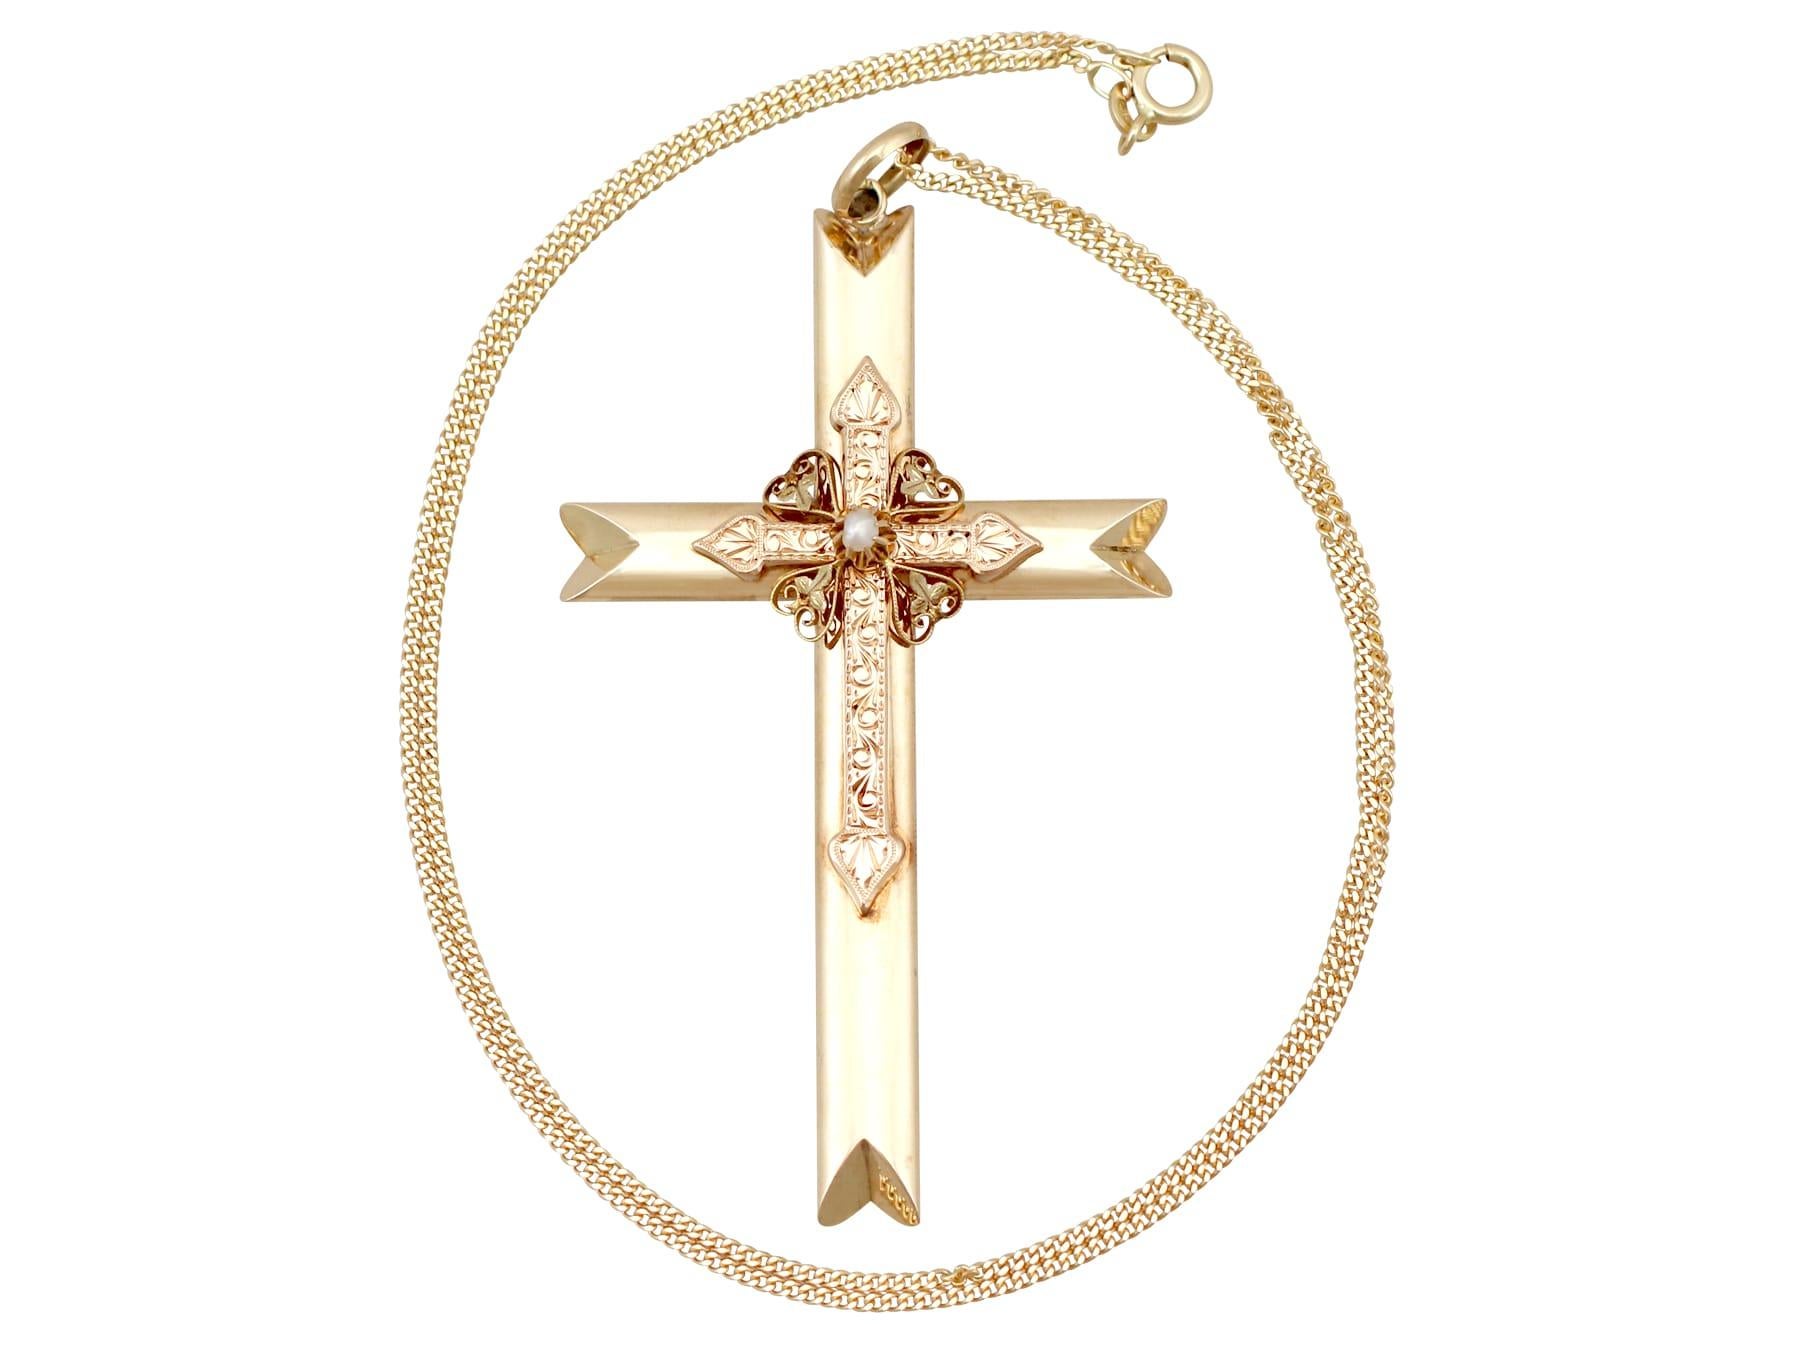 hands holding cross necklace